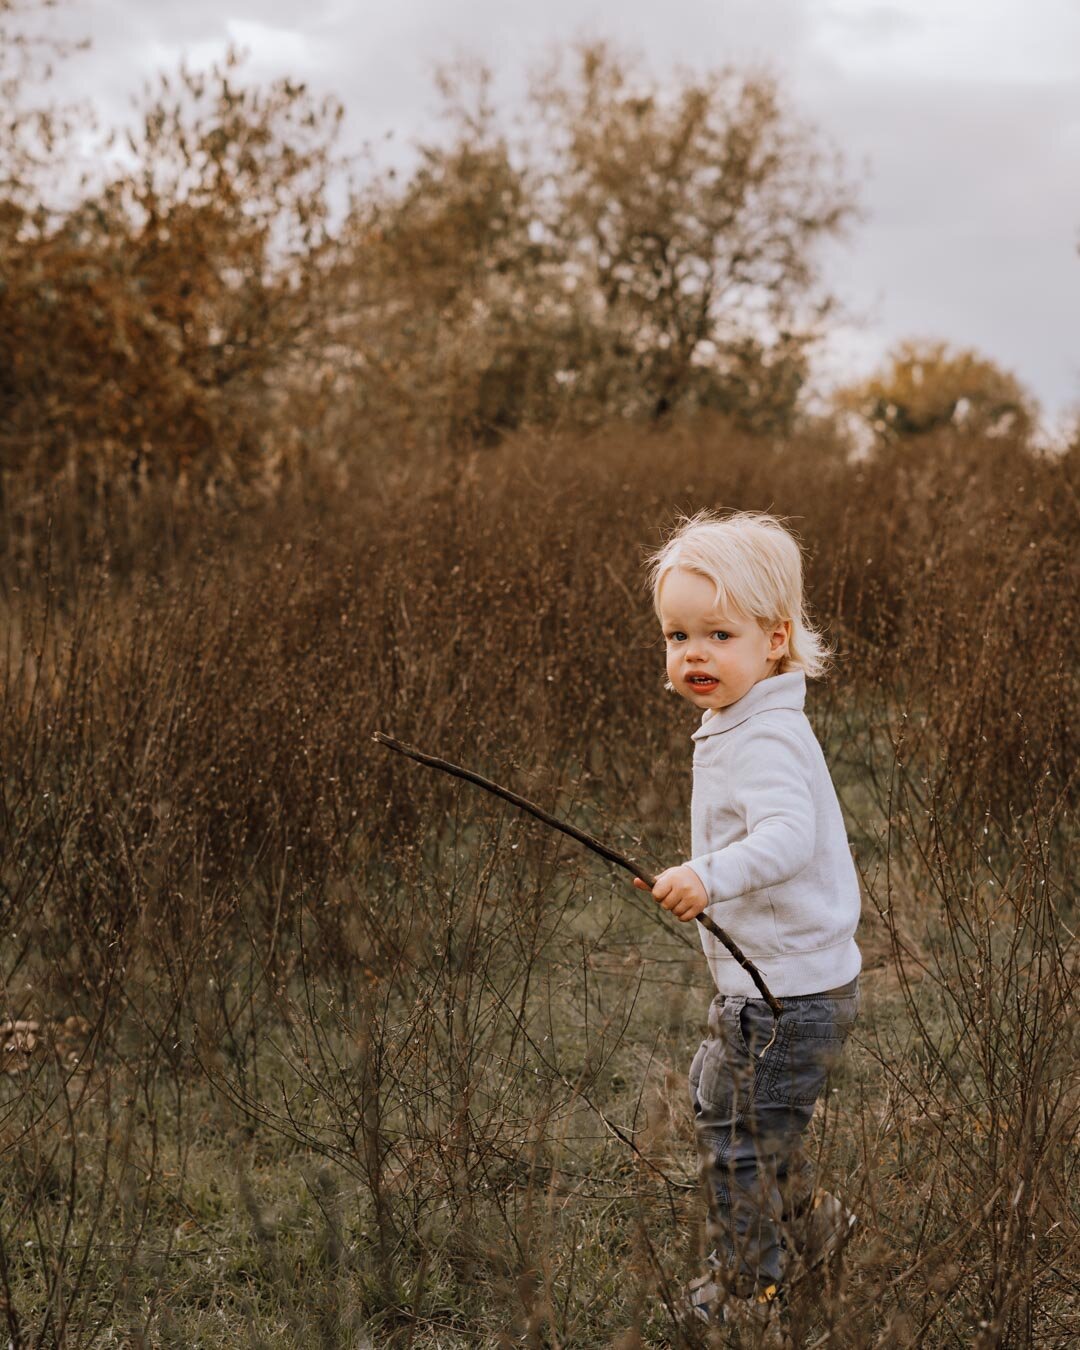 Capturing the pure essence of childhood chaos and joy with this little whirlwind dude! 📸✨ From playful giggles to tickles and finding sticks to play with, every image freezes a moment to be cherished forever. Toddlerhood, you're a wild adventure, an